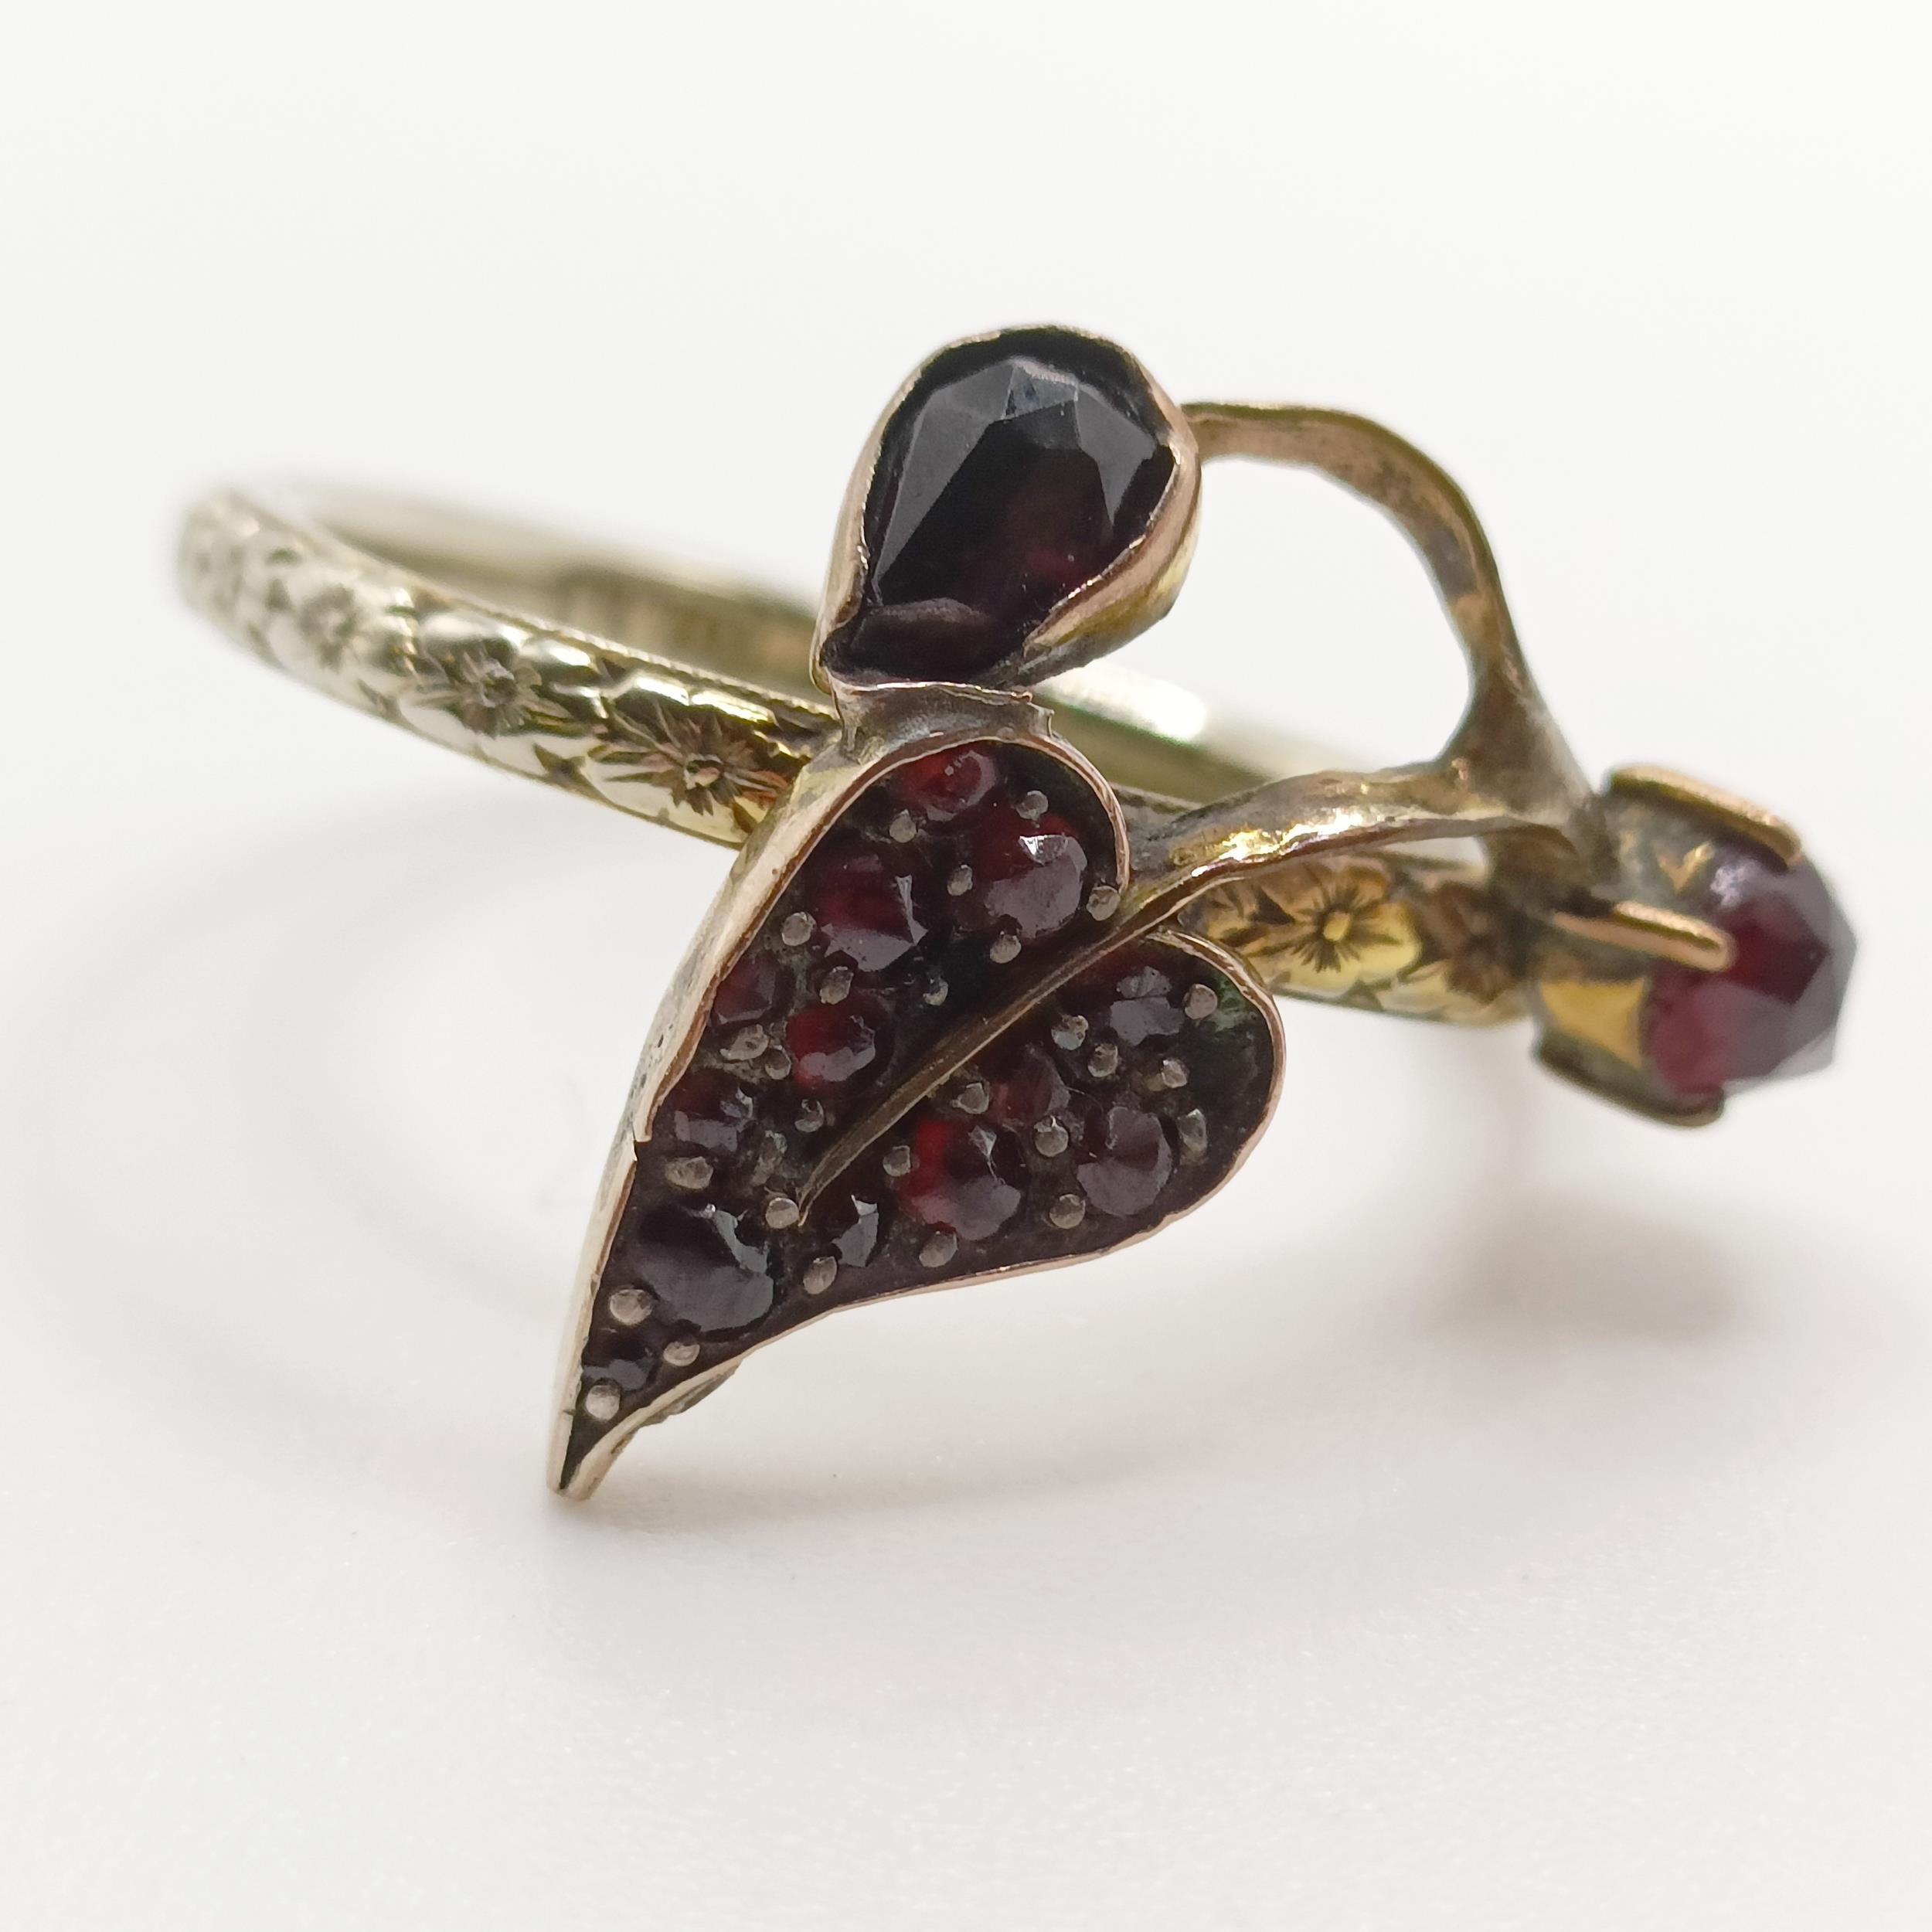 A platinum wedding band, ring size K, and a 18ct gold wedding band, with a garnet mount added, - Image 3 of 7